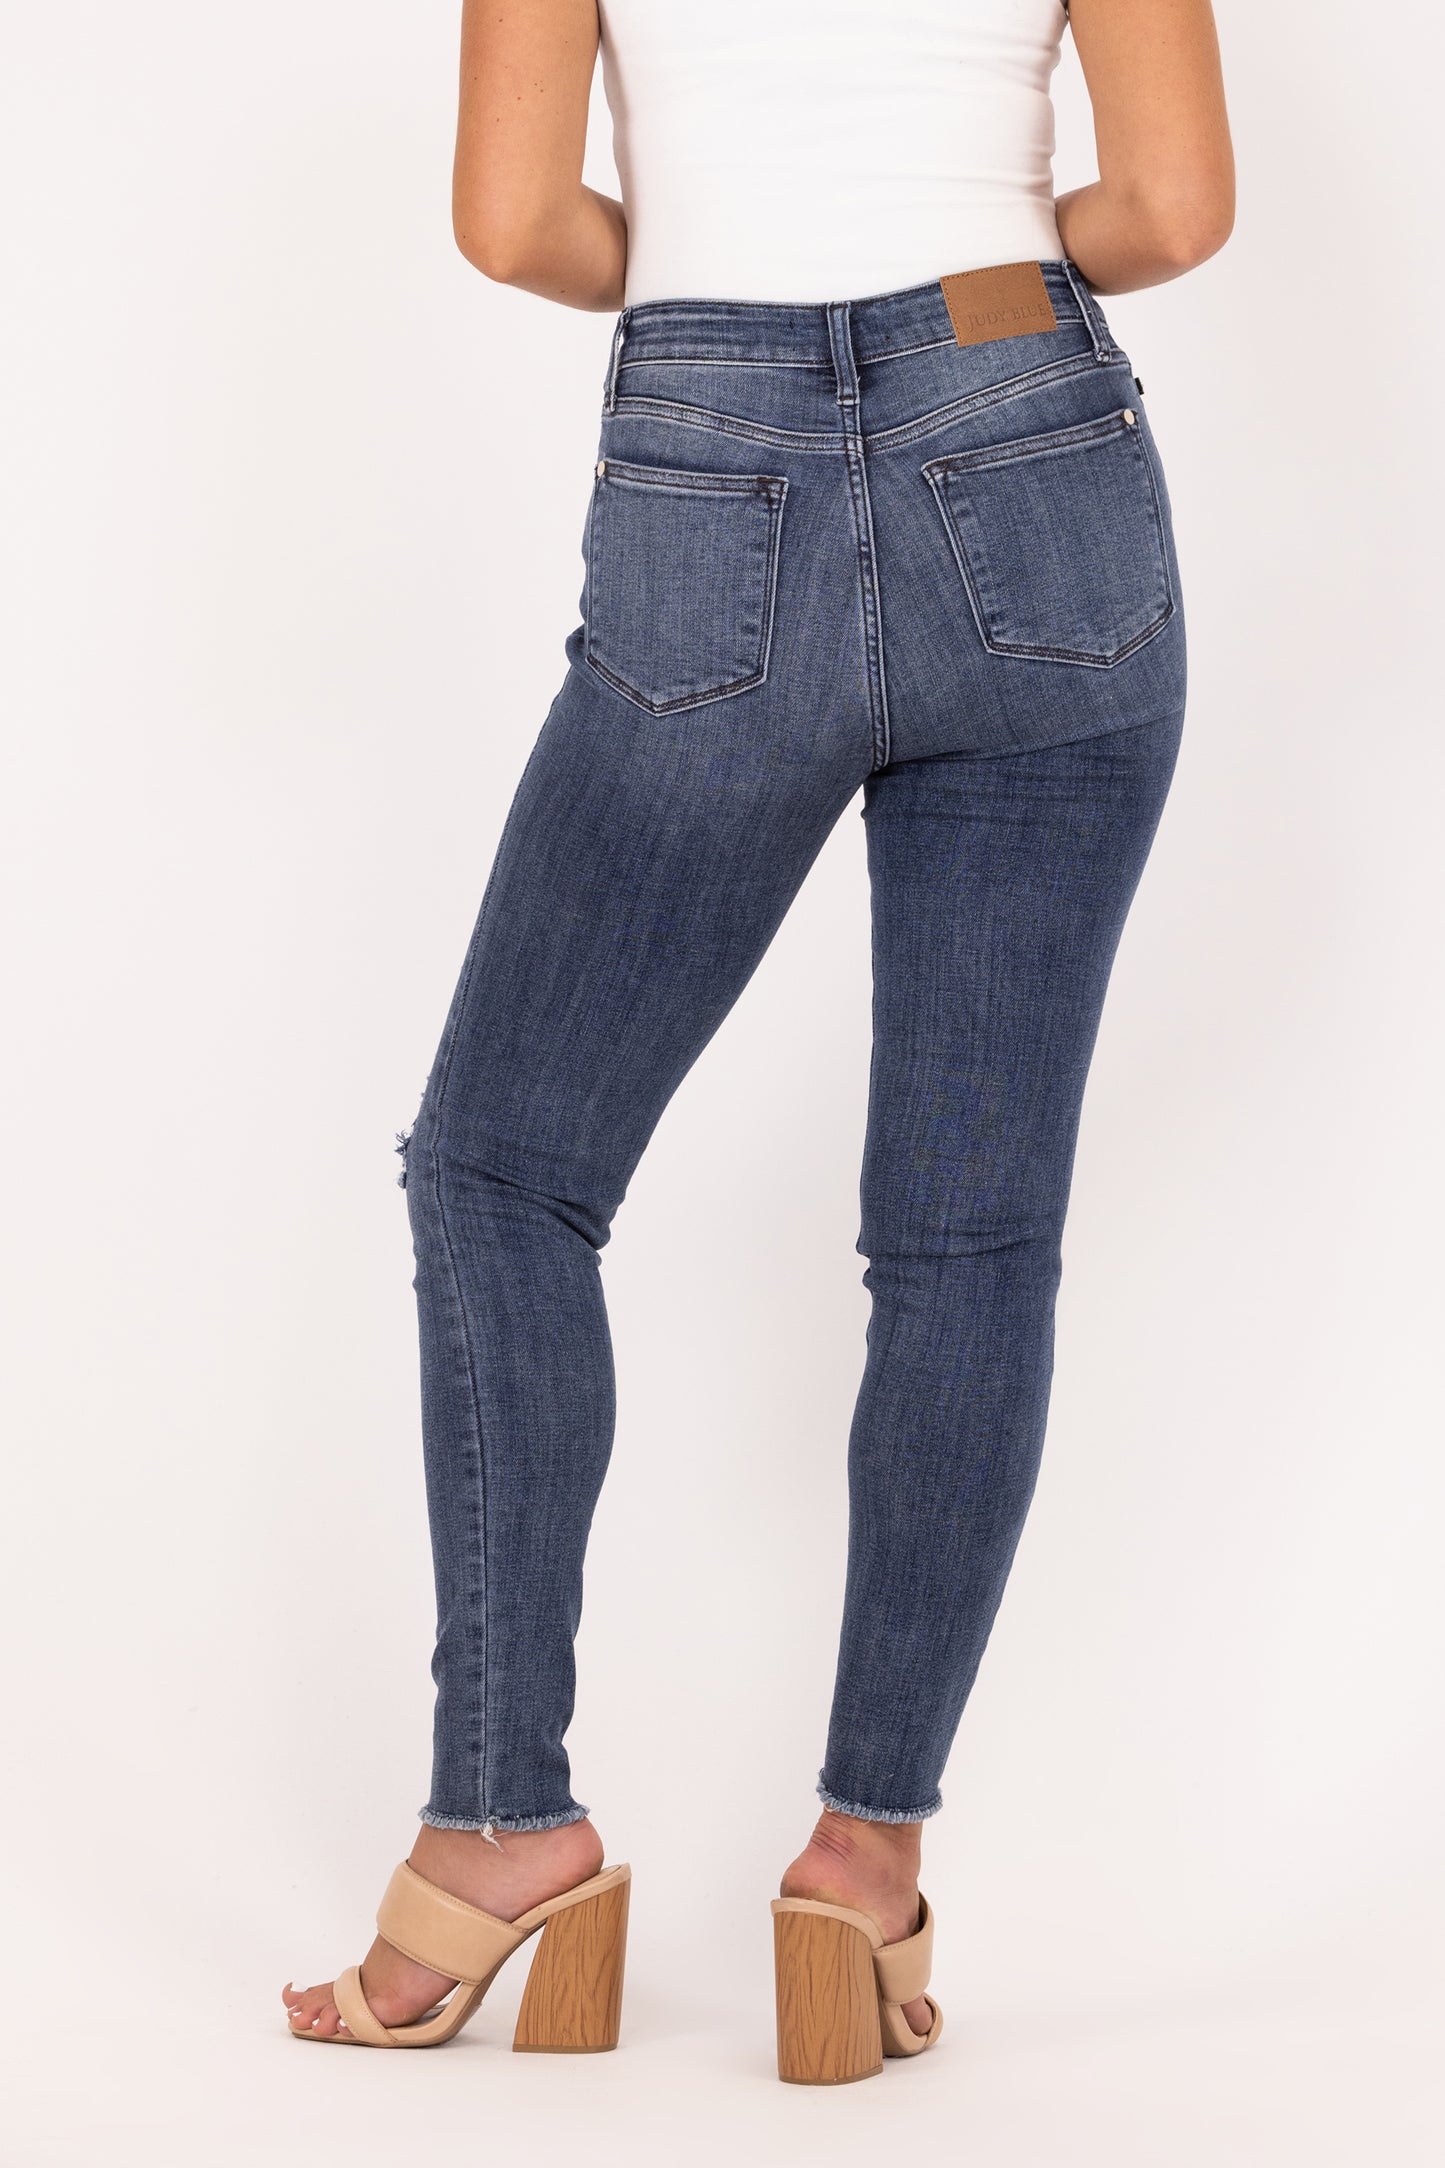 You And Me Belong Together from Judy Blue: High-Rise Skinny Denim